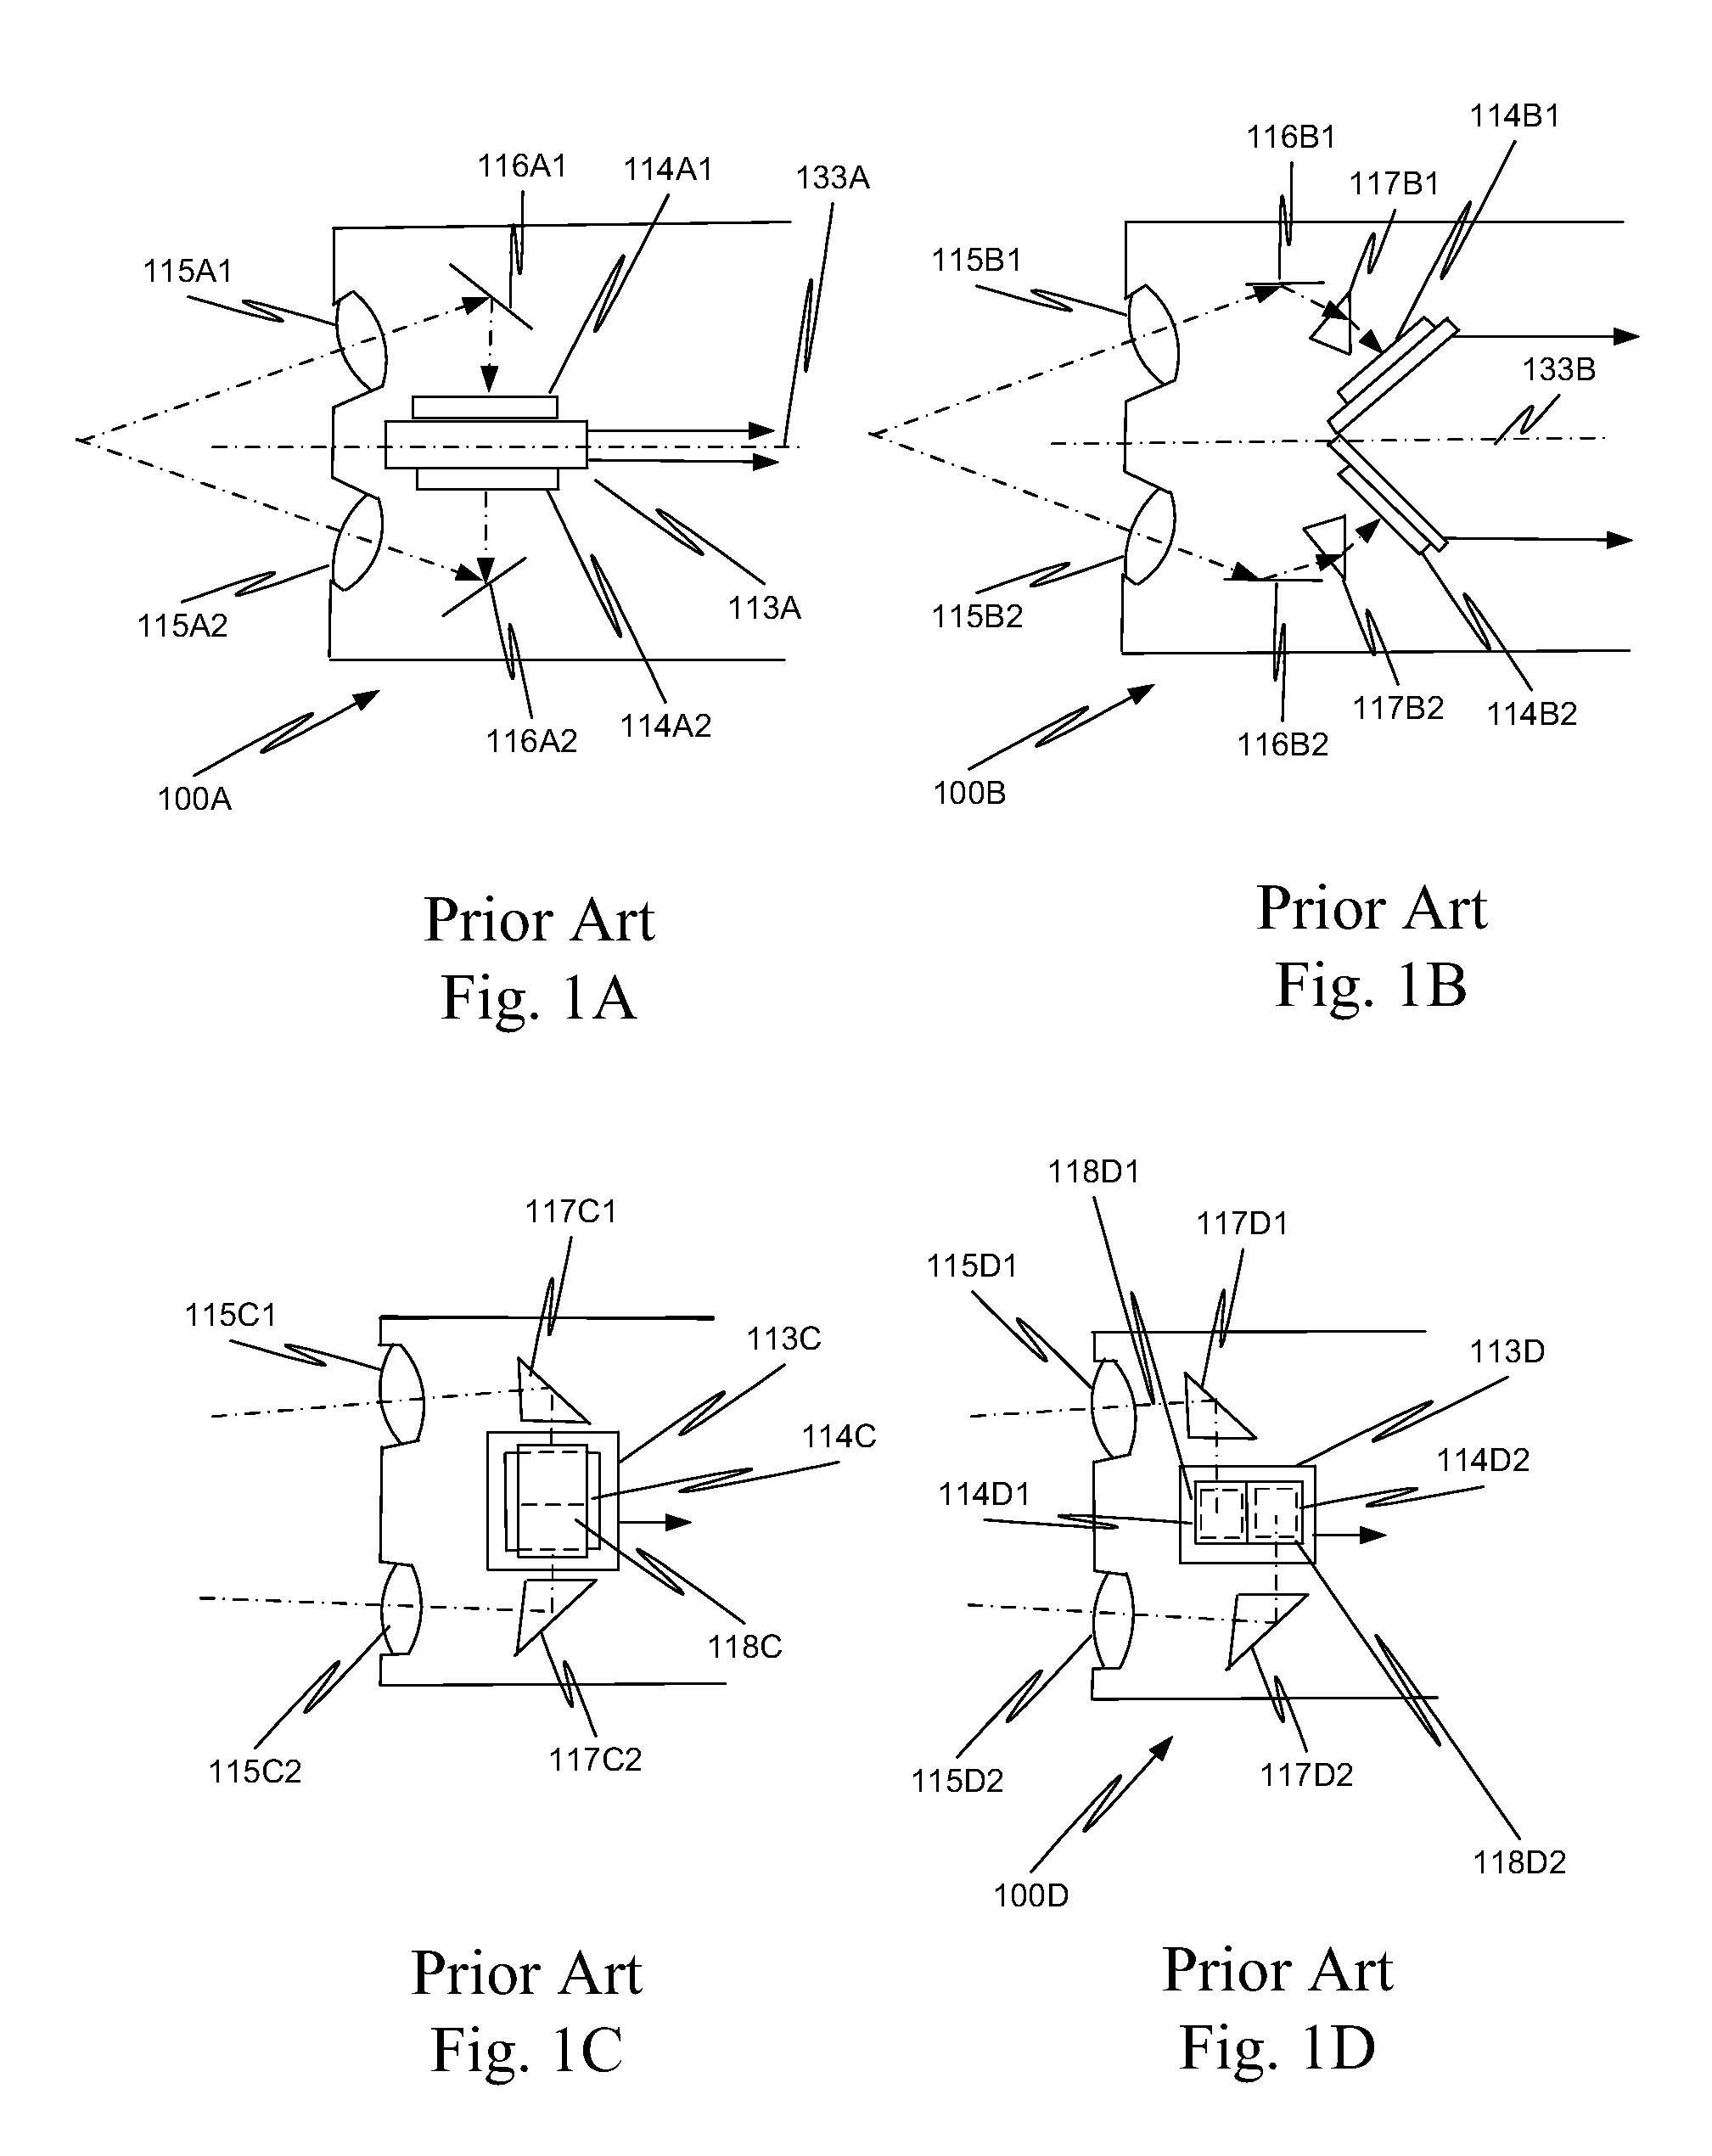 Image capture unit and method with an extended depth of field